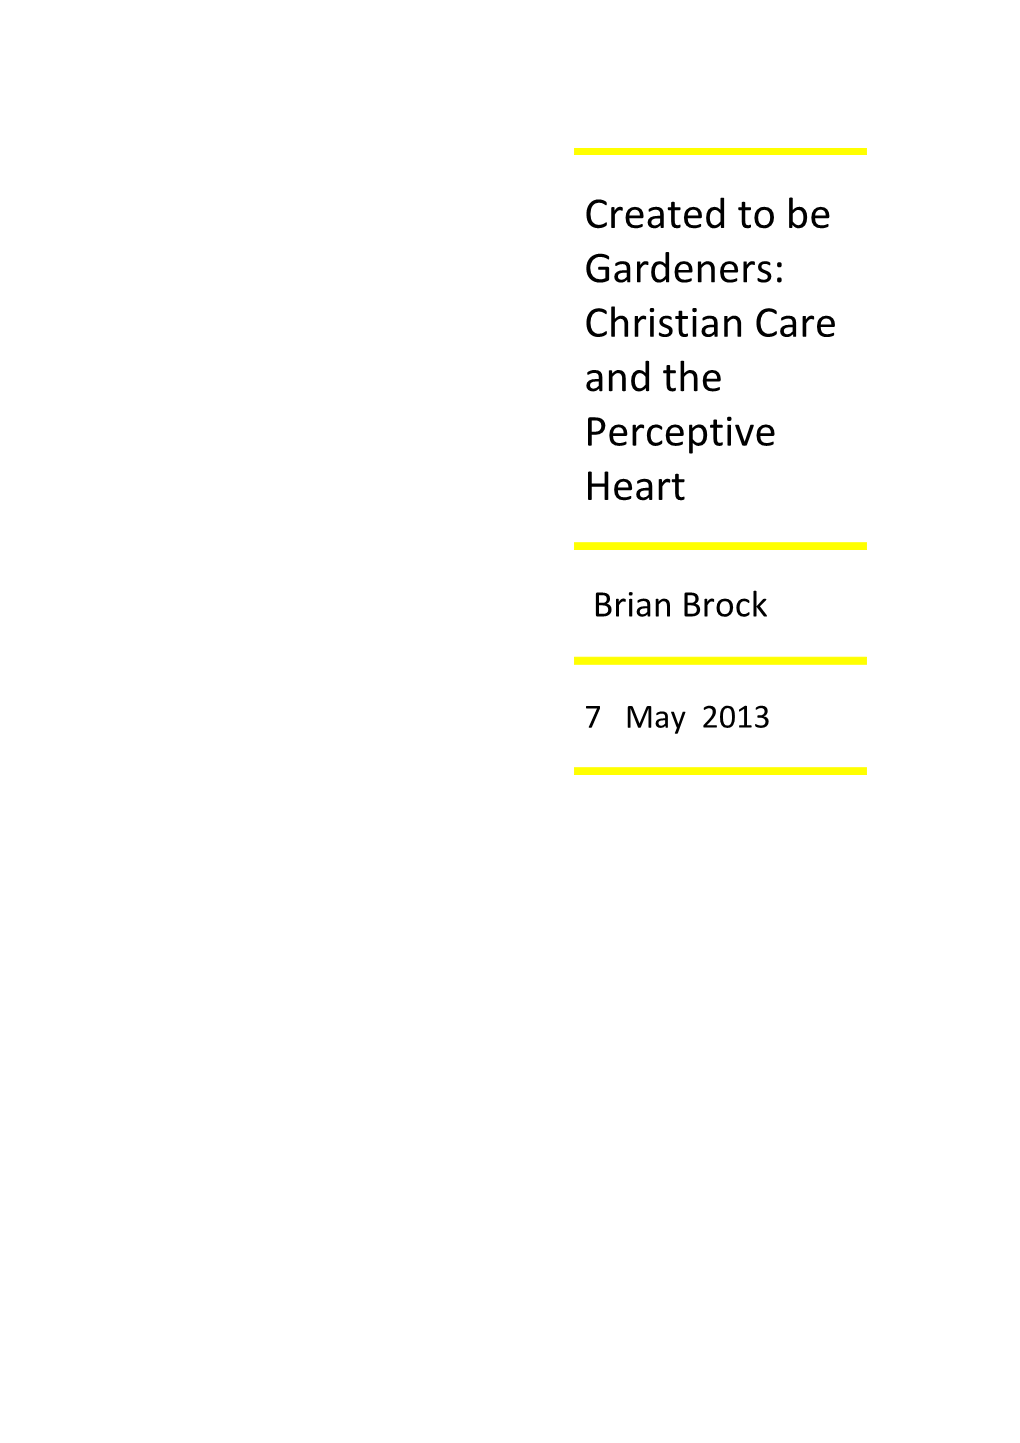 Created to Be Gardeners: Christian Care and the Perceptive Heart